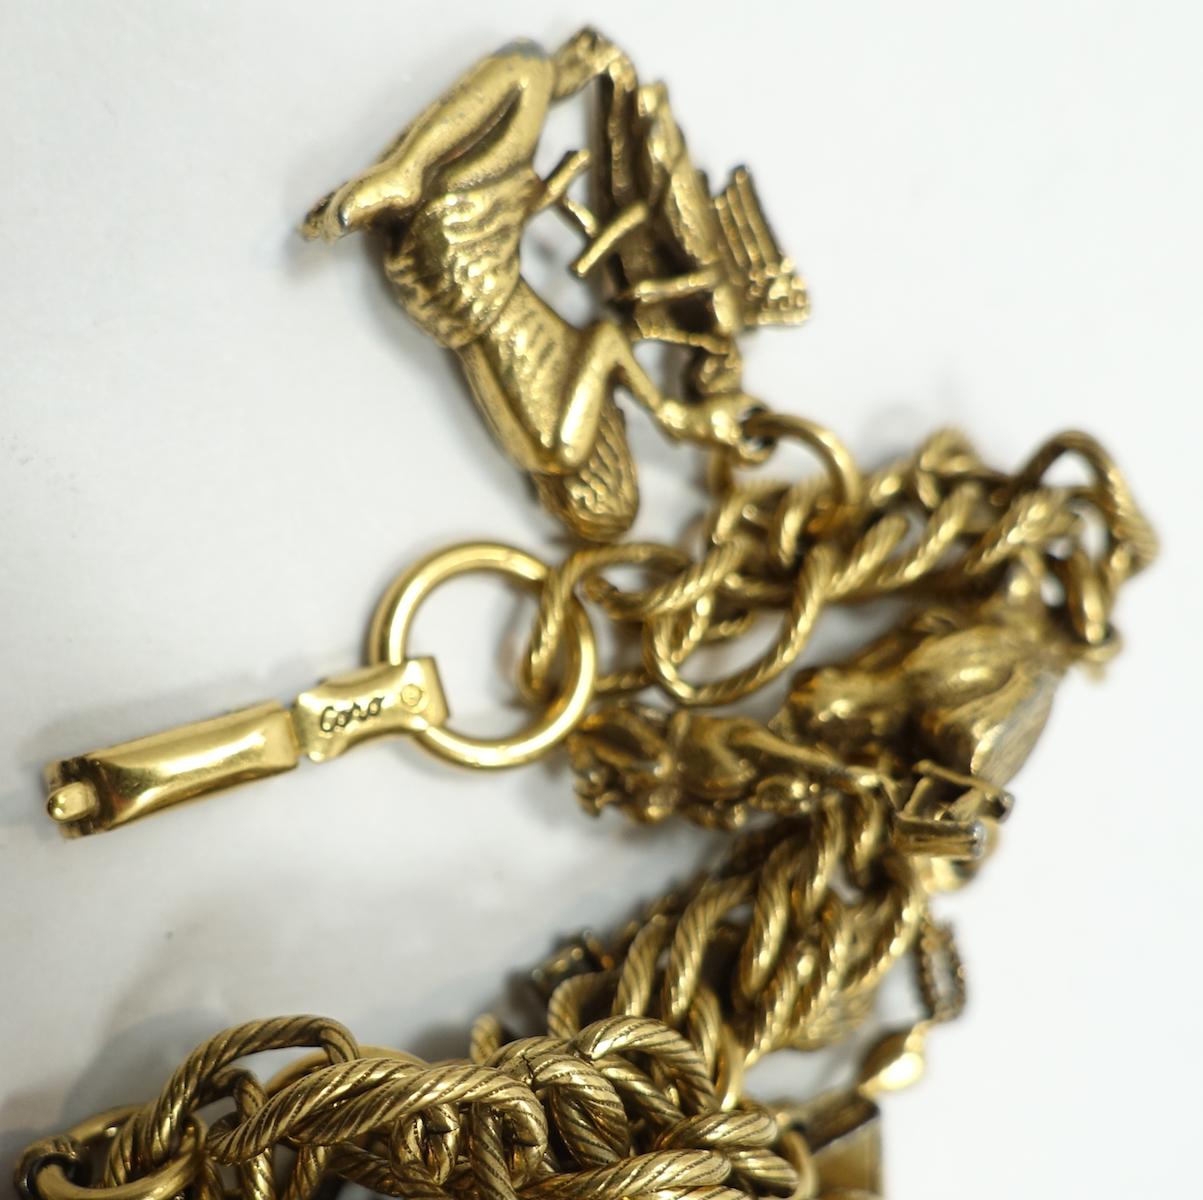 Vintage Signed Coro 10 Commandments Charm Bracelet In Good Condition For Sale In New York, NY